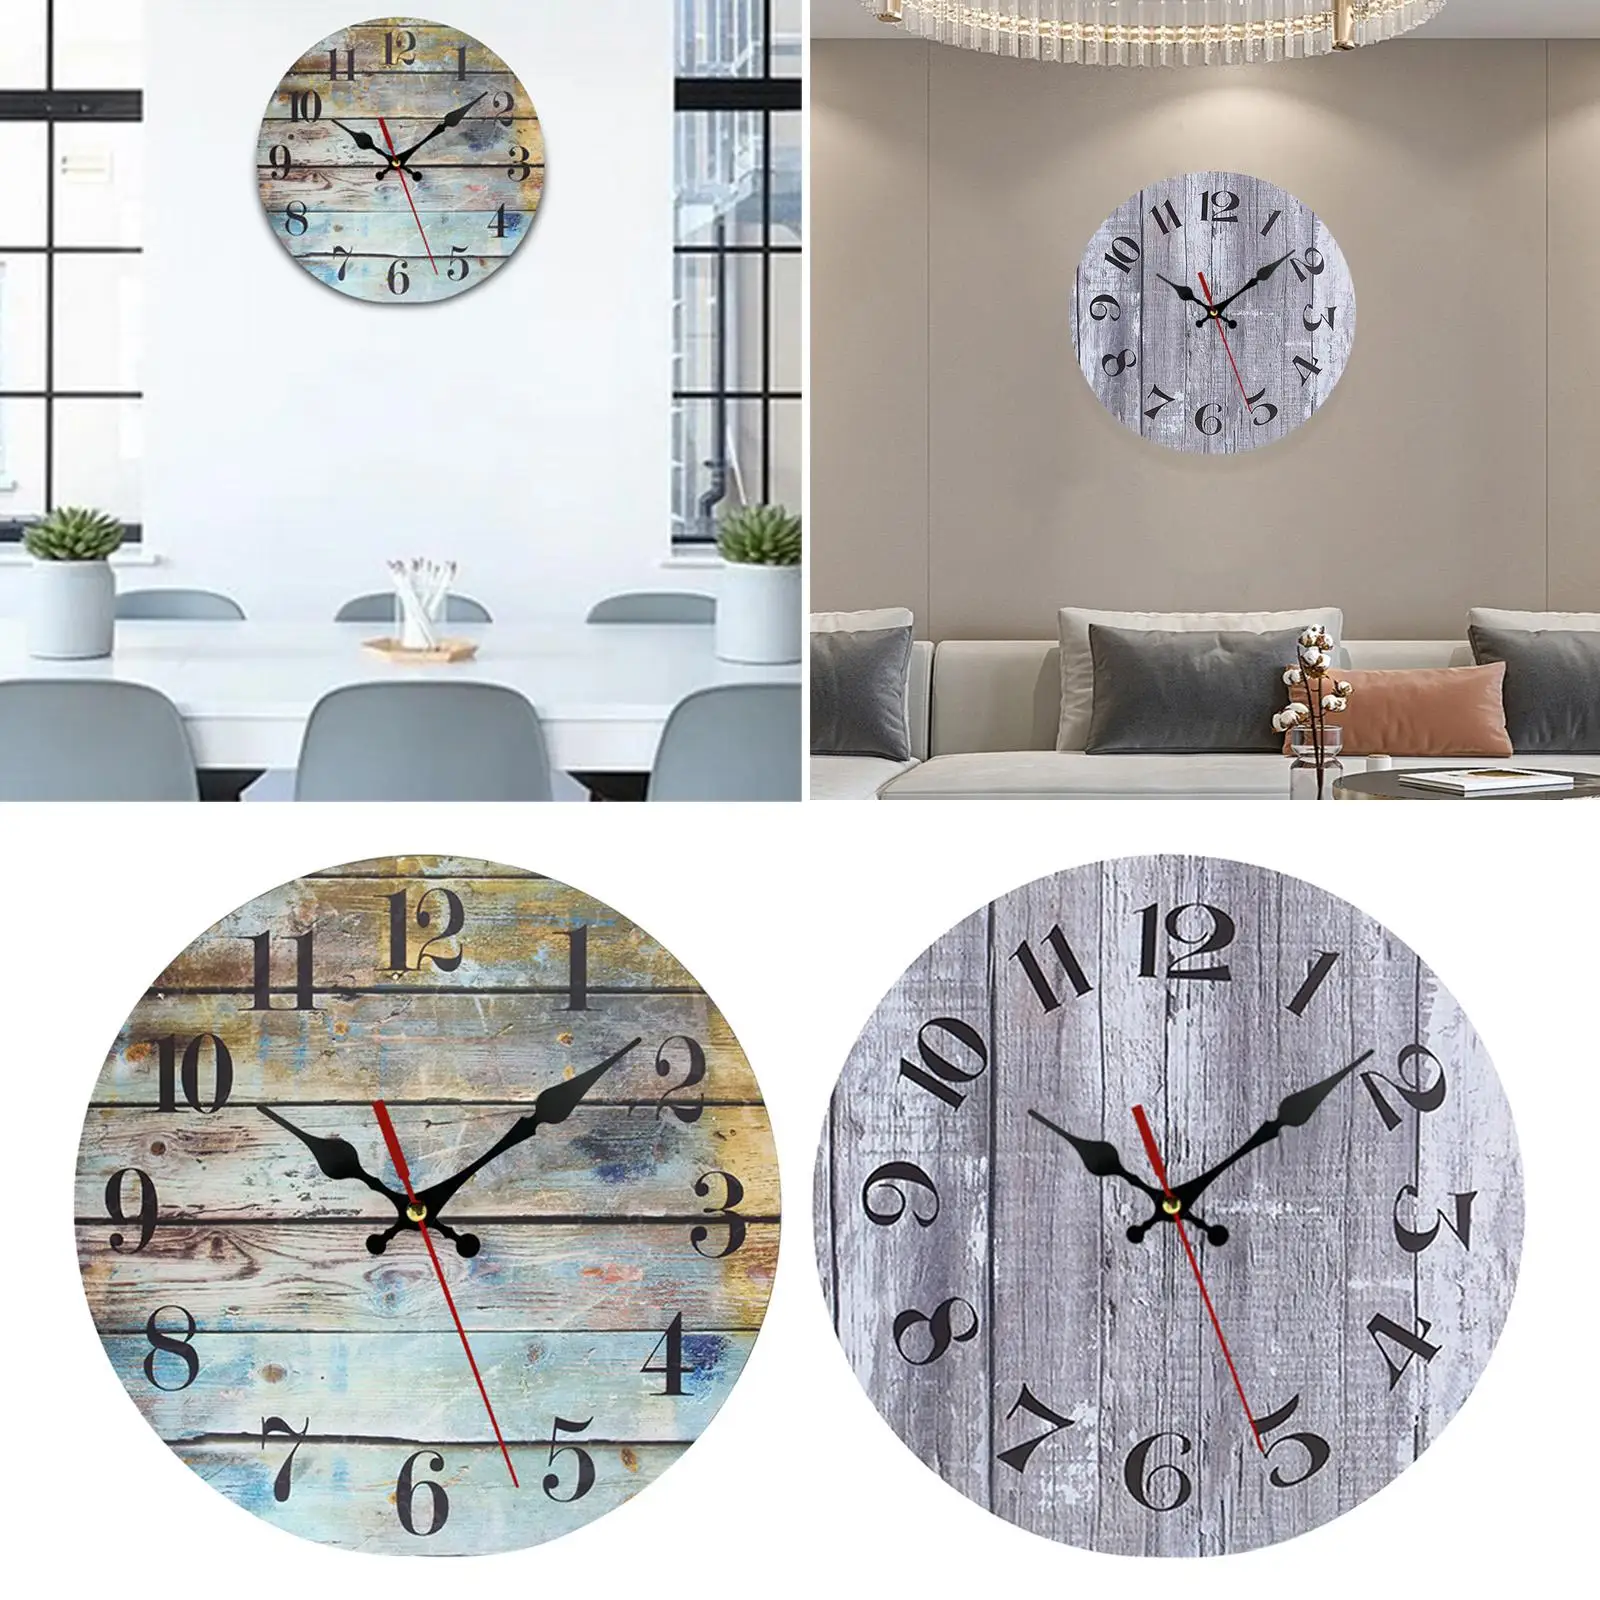 25cm Wood Wall Clock Wooden Decorative Watches Non Ticking Silent Rustic Hanging Clocks for Living Room Bedside Bathroom Home